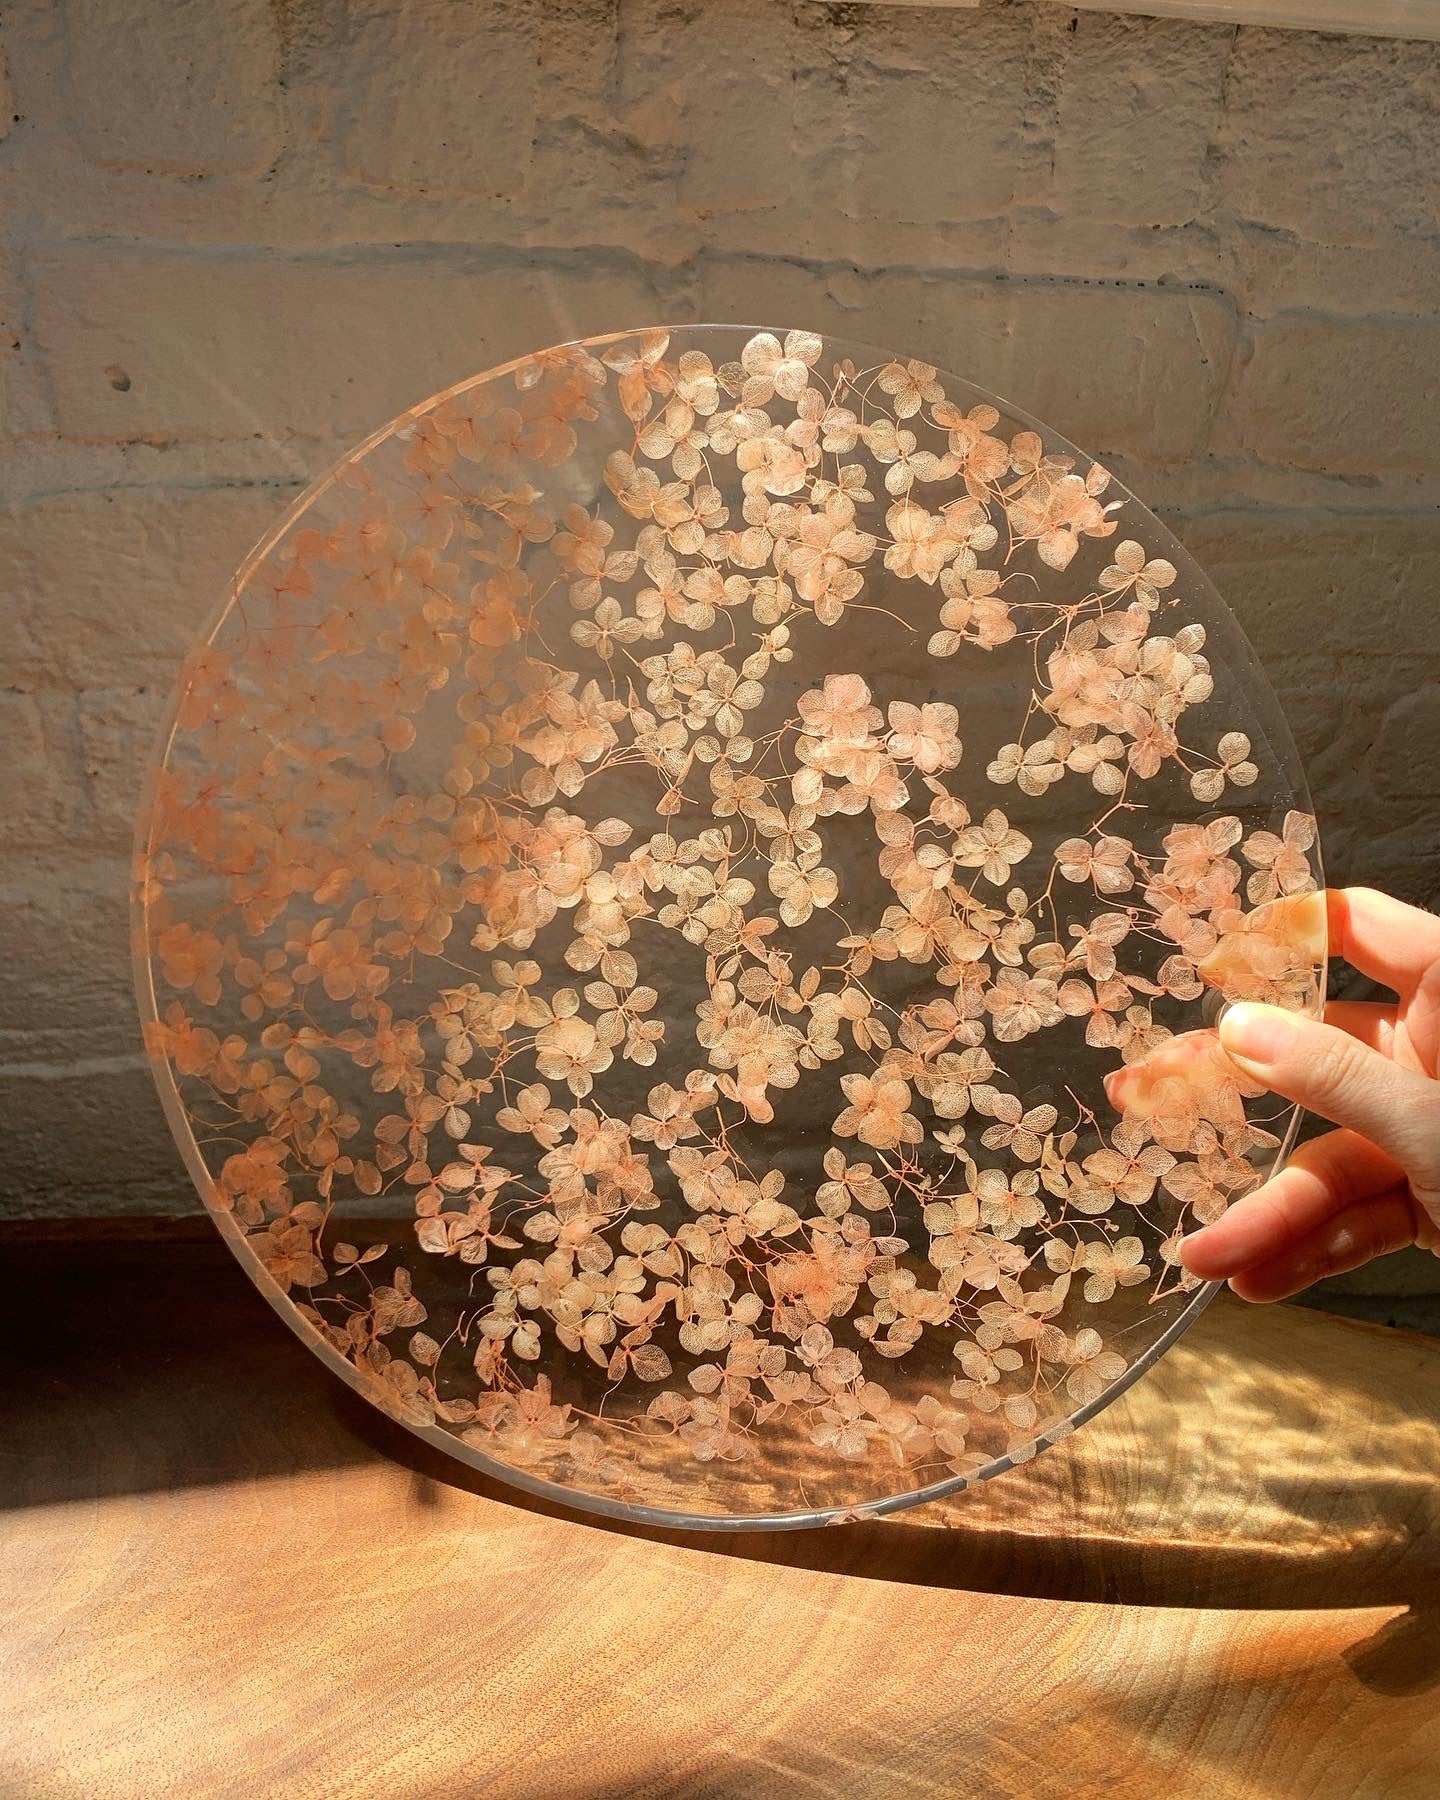 Hundreds of rosy hydrangeas sit suspended in transparent resin. A durable-yet-whimsical addition to your home decor. Serve cocktails, use as a vanity tray, or simply display as an incredible objet d'art.